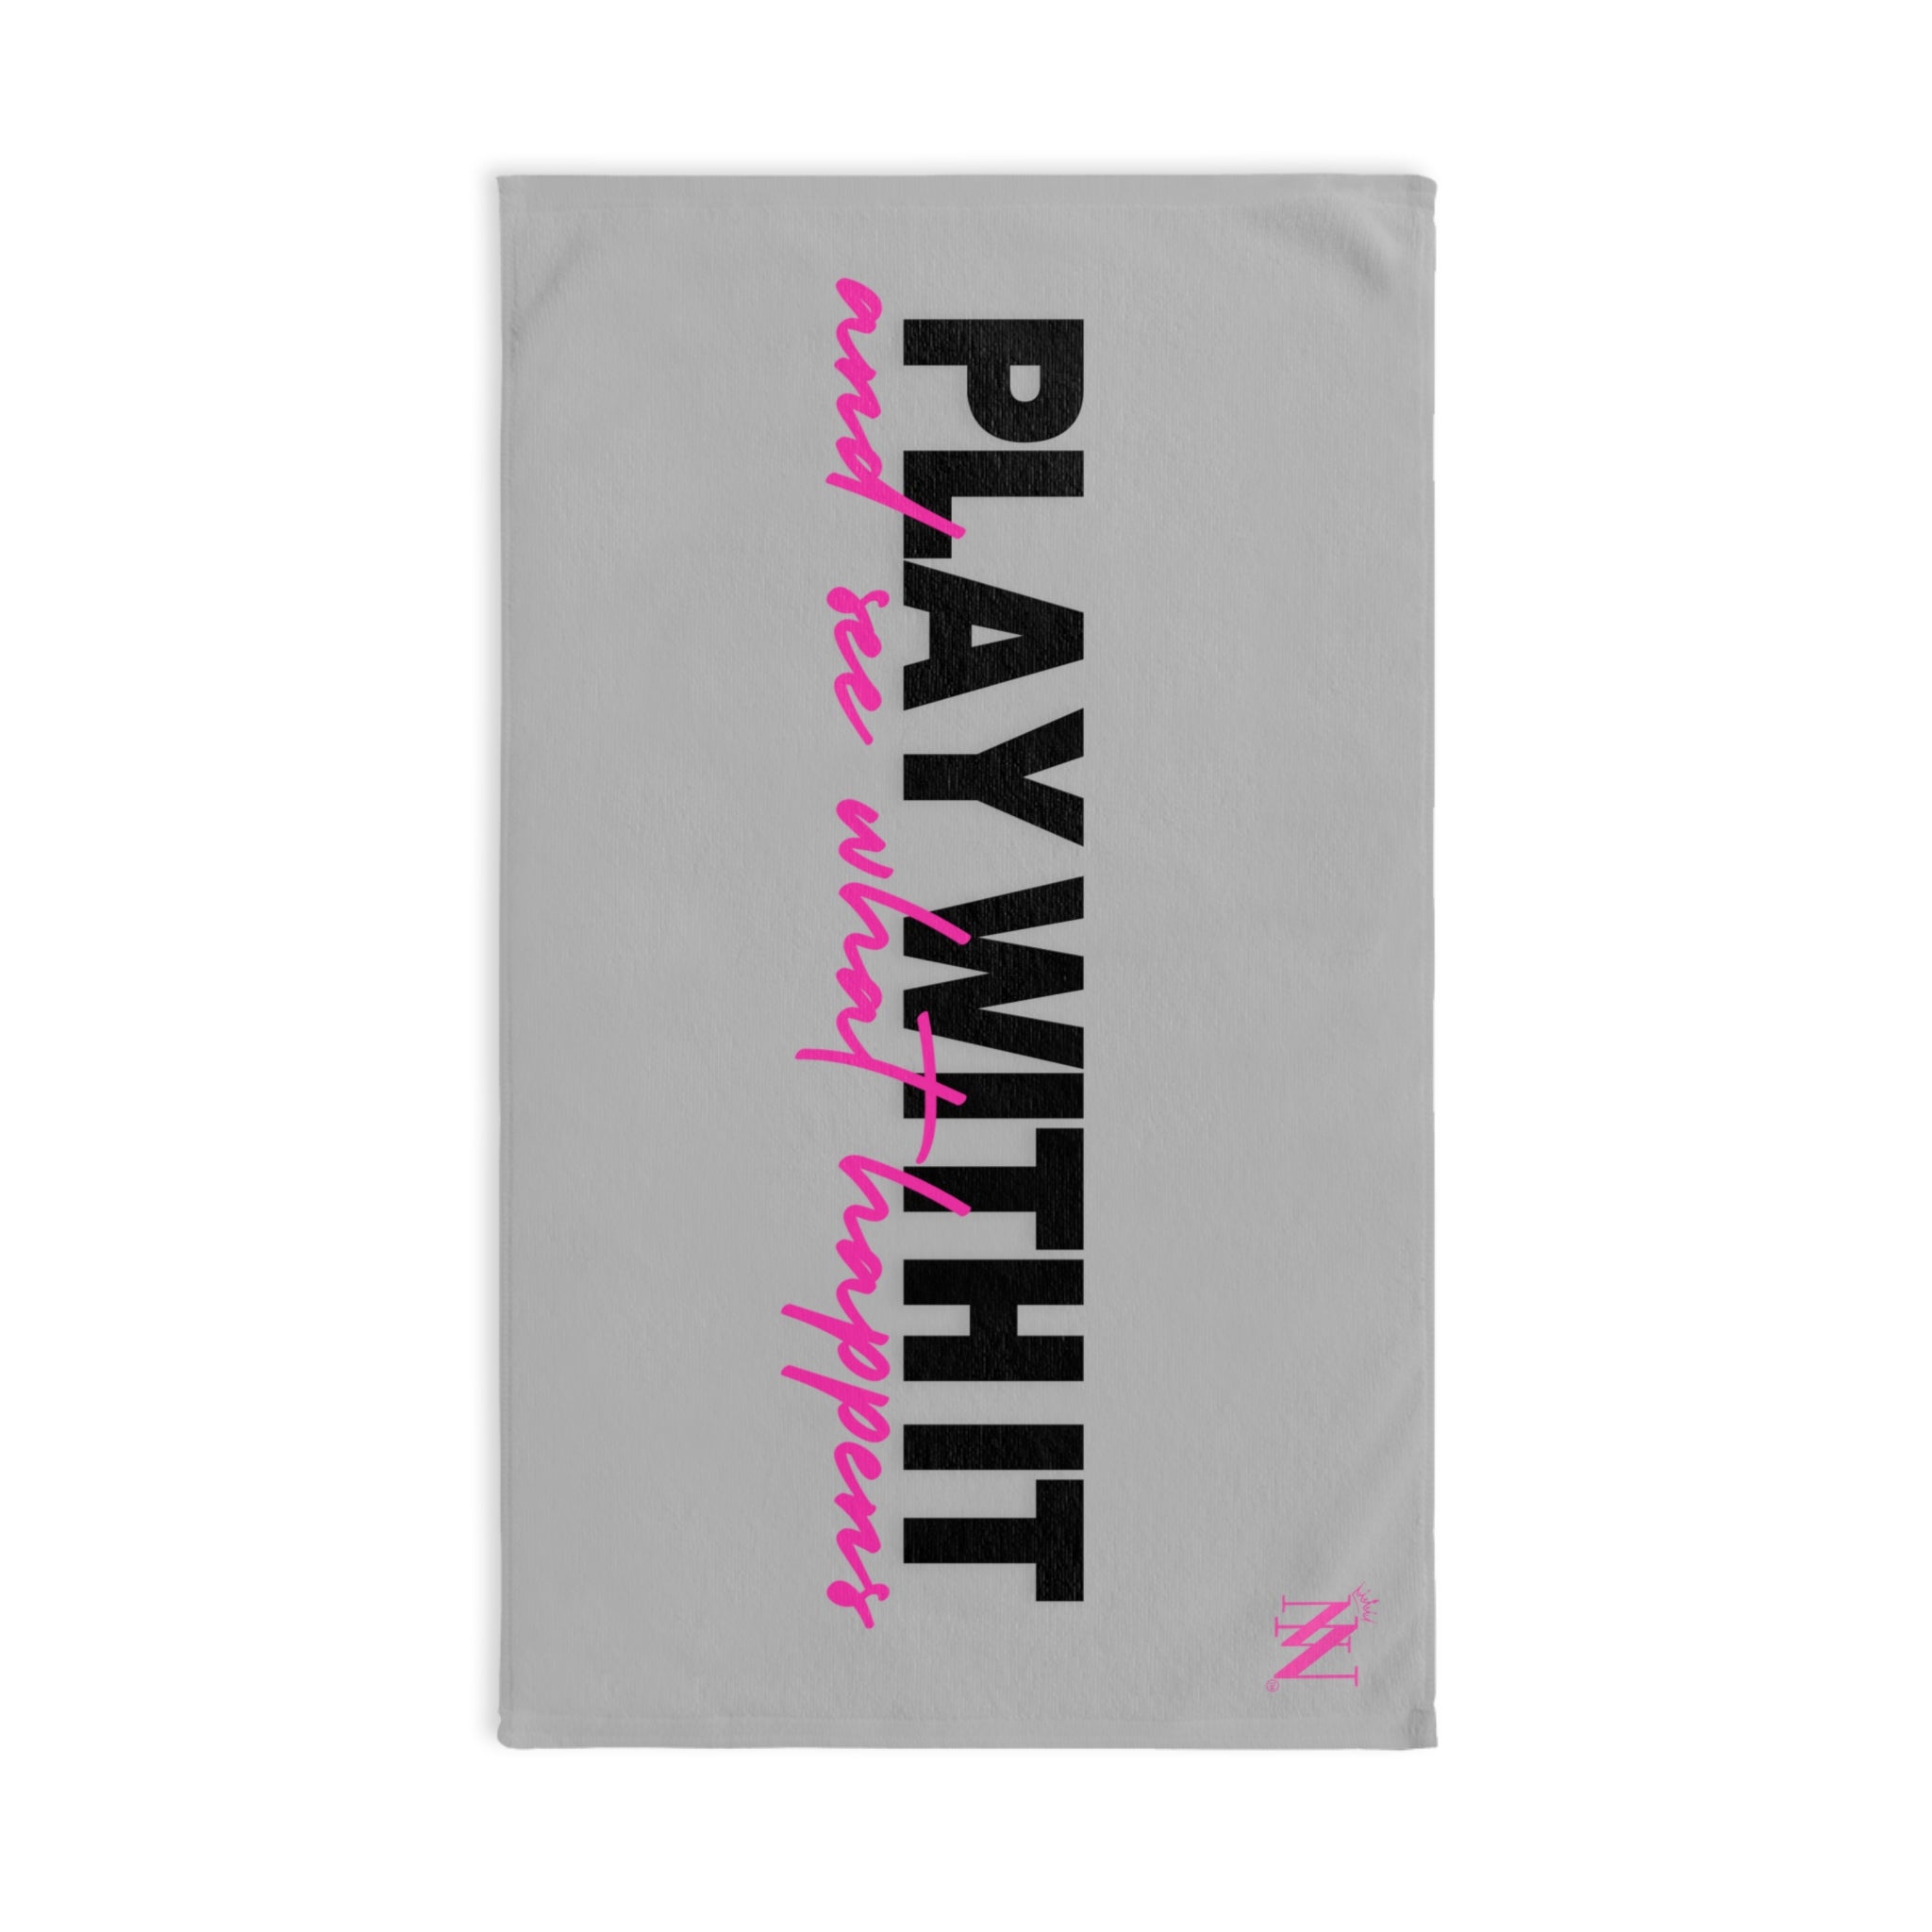 Play with it love towel